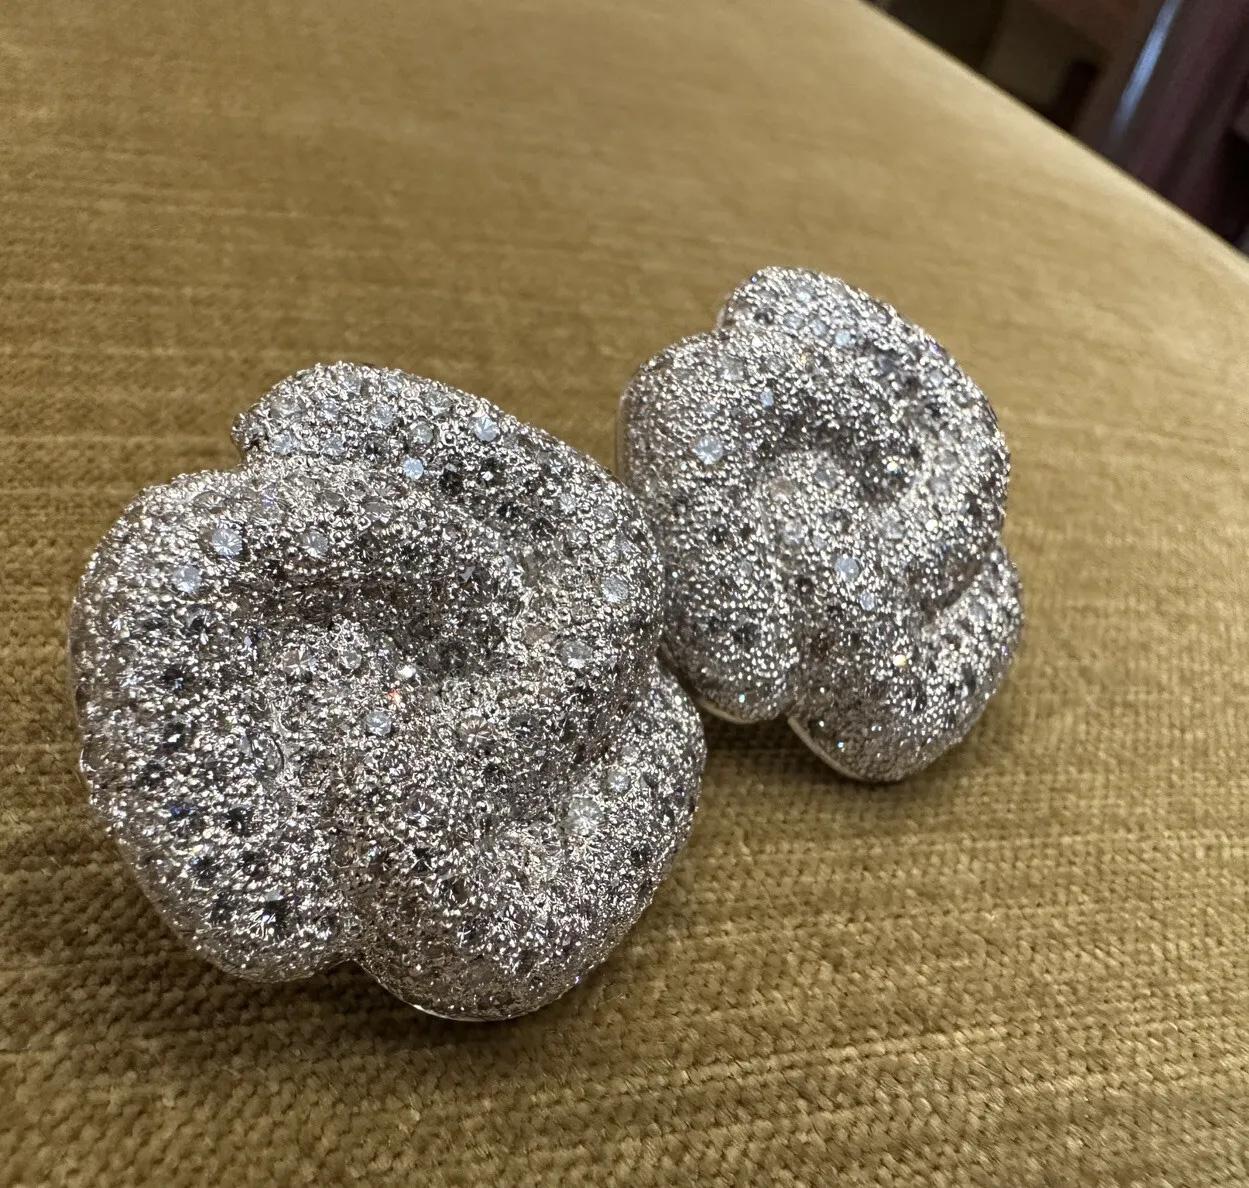 Large Pave Diamond Knot Earrings 10.00 Carat Total Weight in 18k/14k White Gold 

Large Diamond Earrings features a Knot Design with 10.00 carats of Round Brilliant Diamonds Pave set in 18k White Gold with 14k White gold Clip backs.

Total diamond